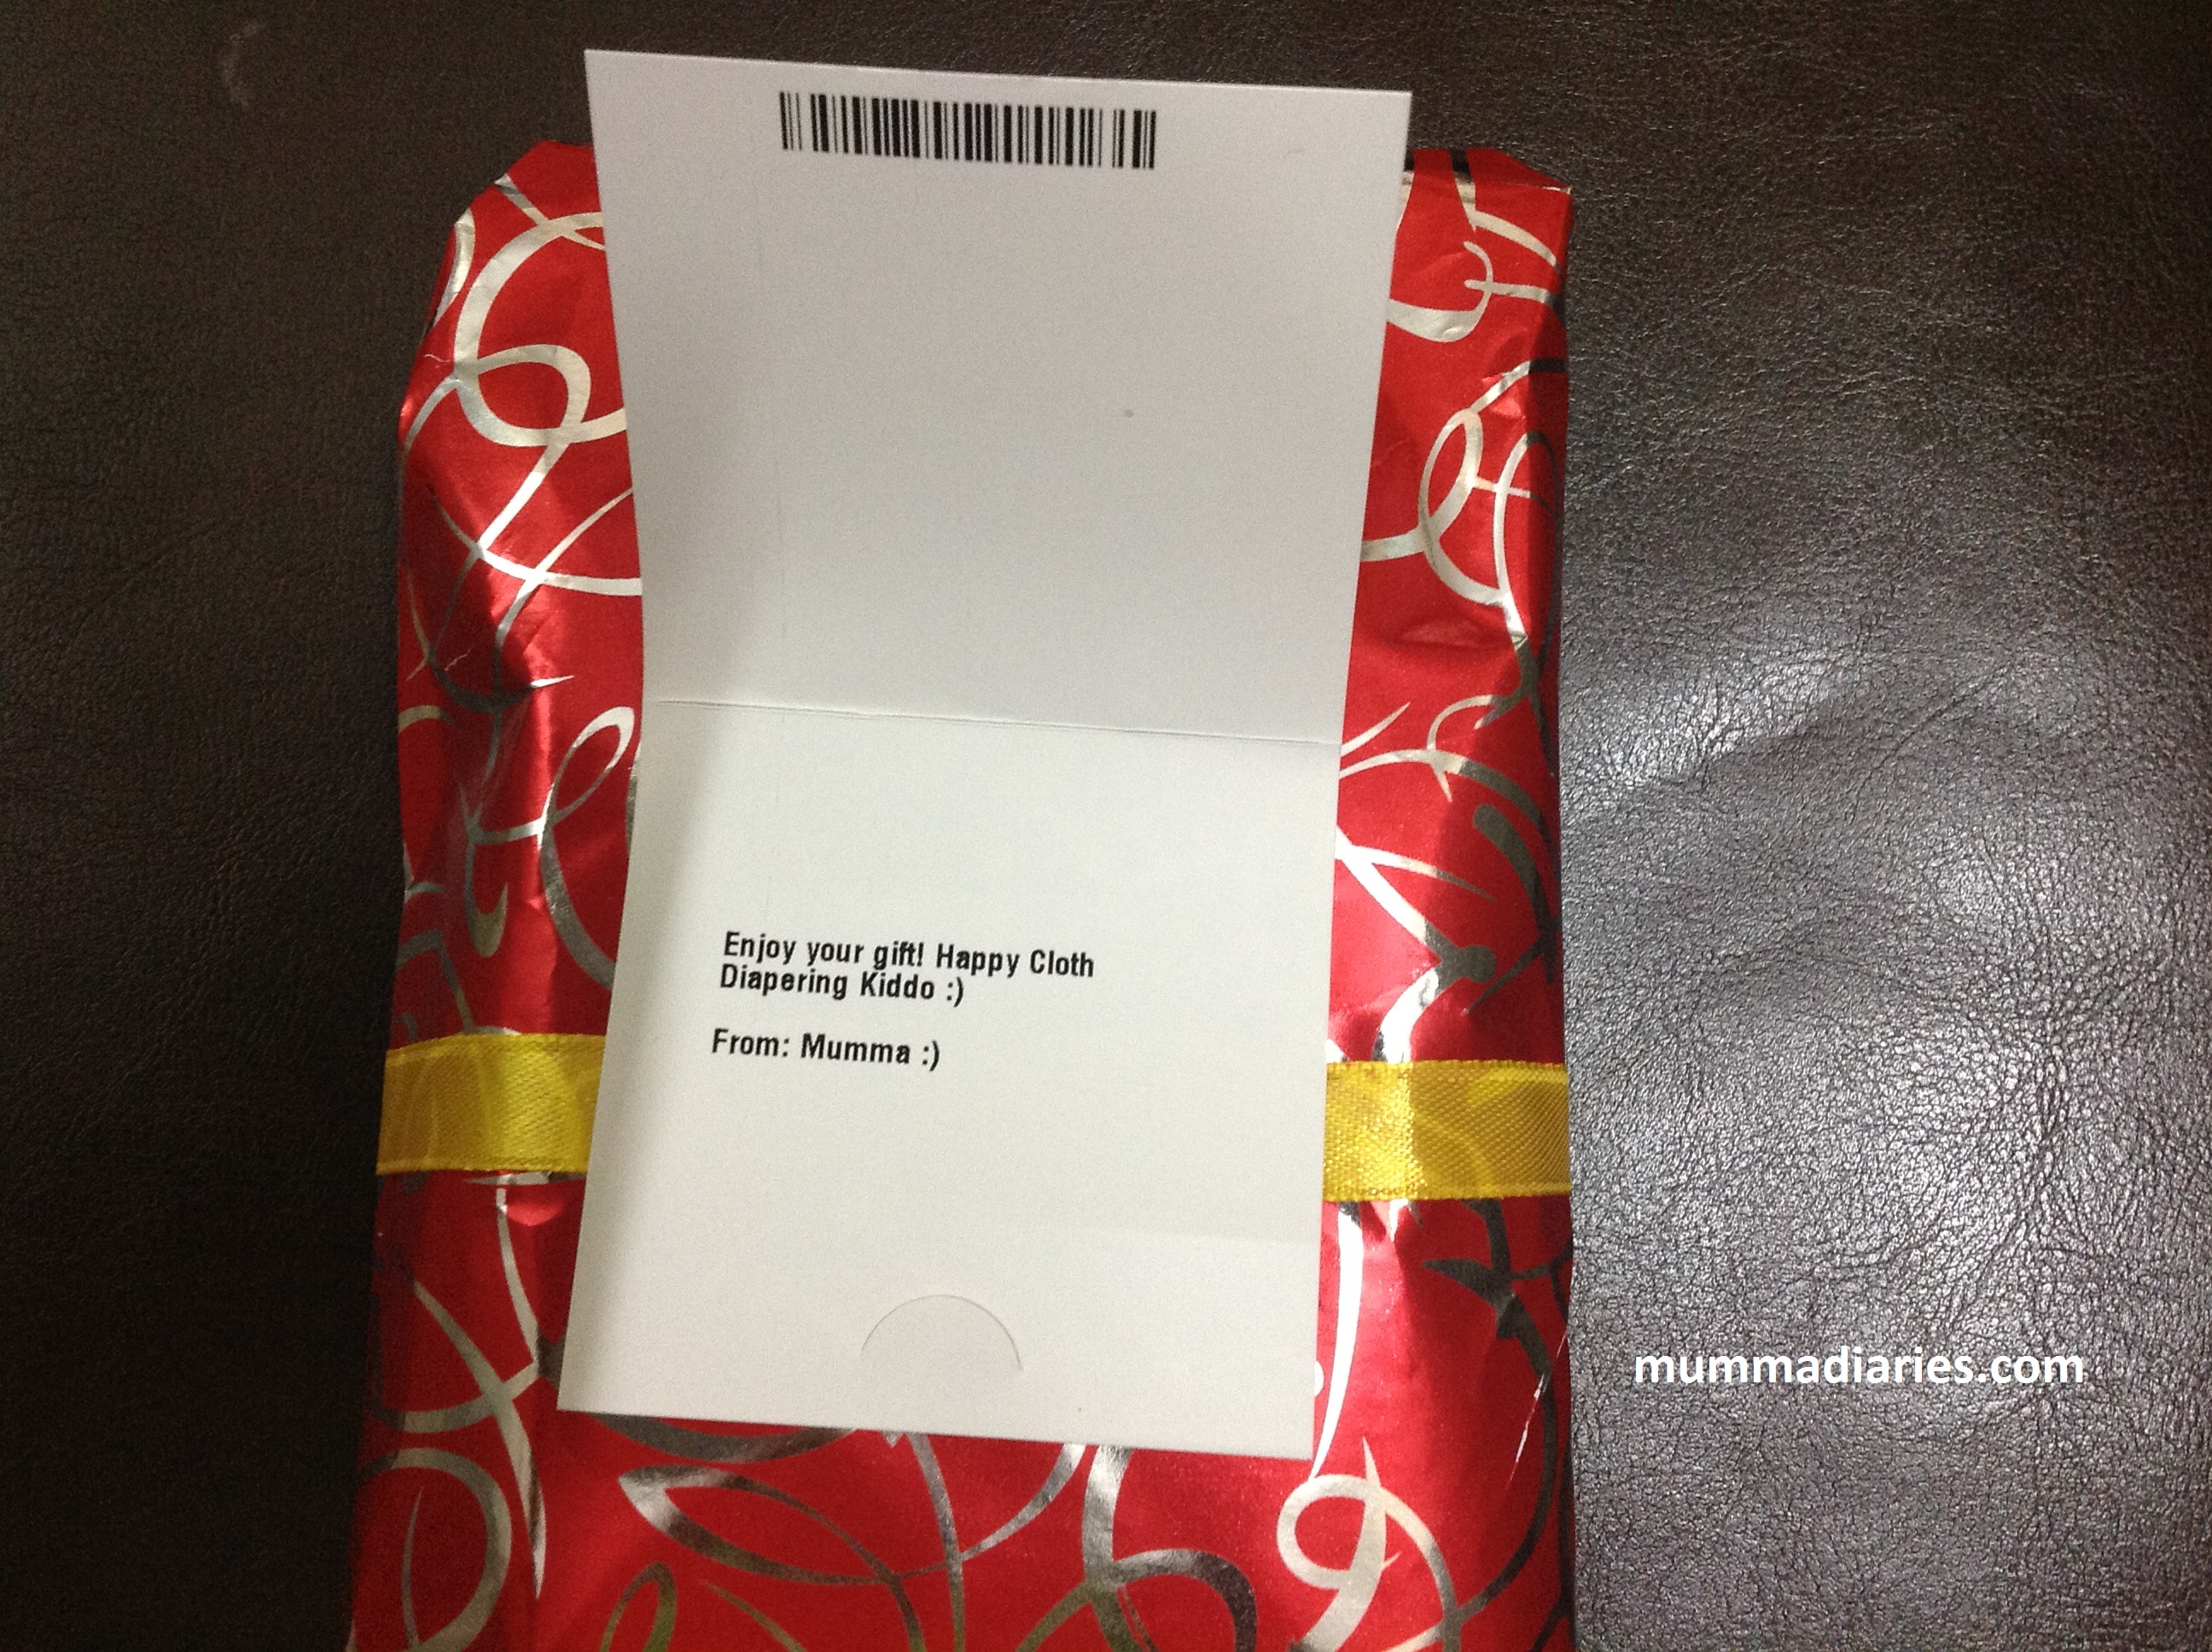 Yes, i got it gift wrapped with a message et al! Cute, isn't it?!